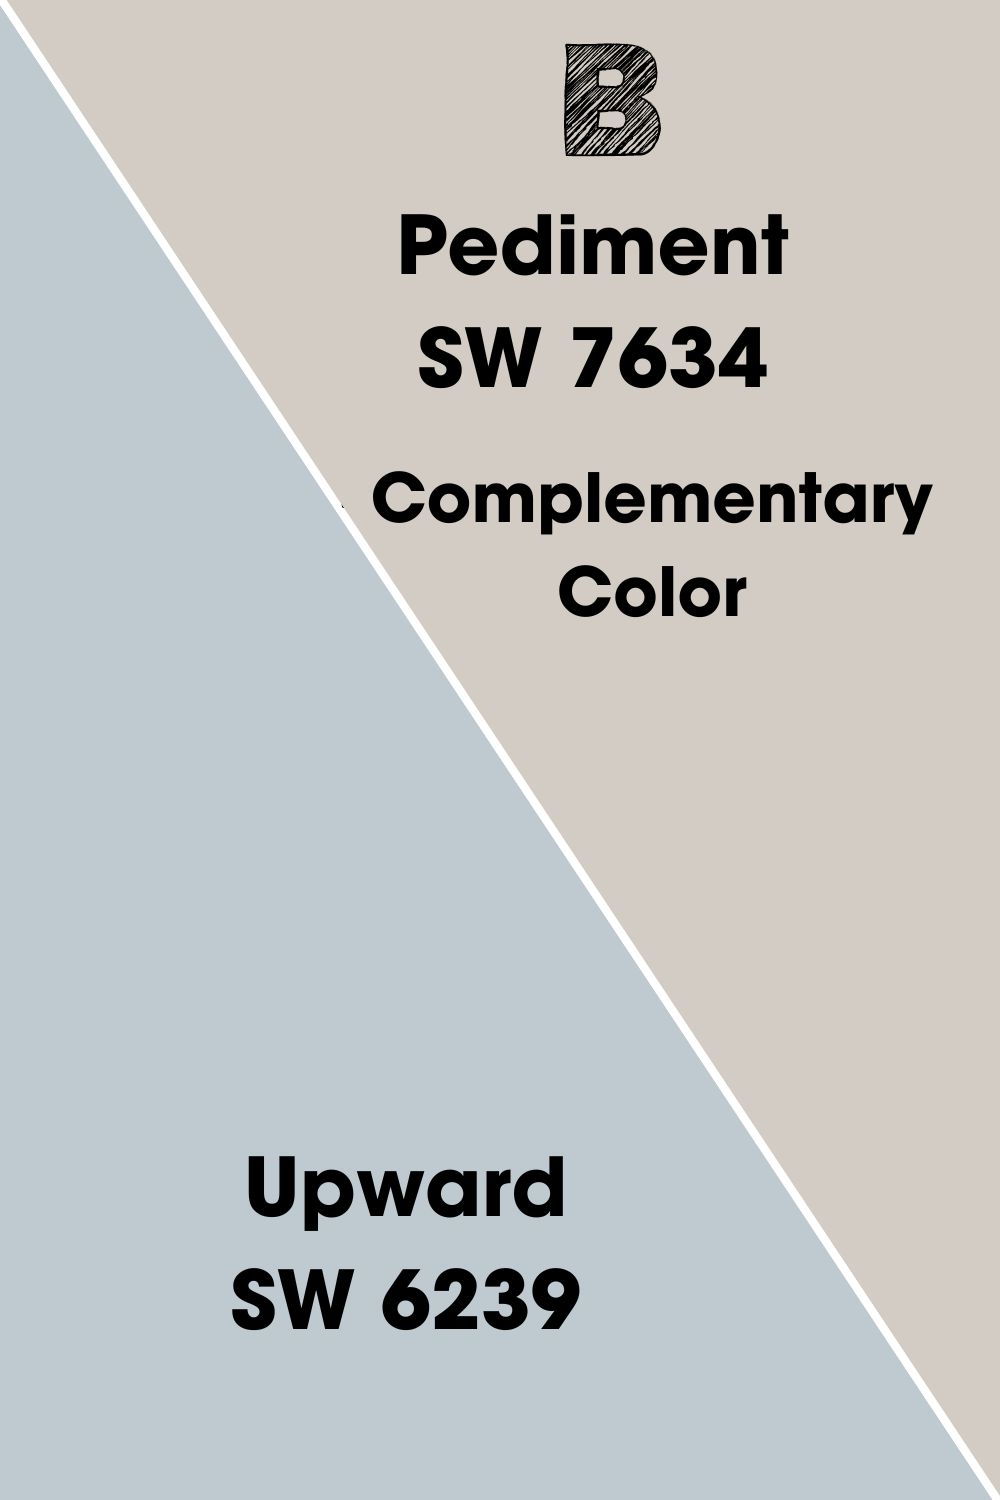 Pediment’s Complementary Color